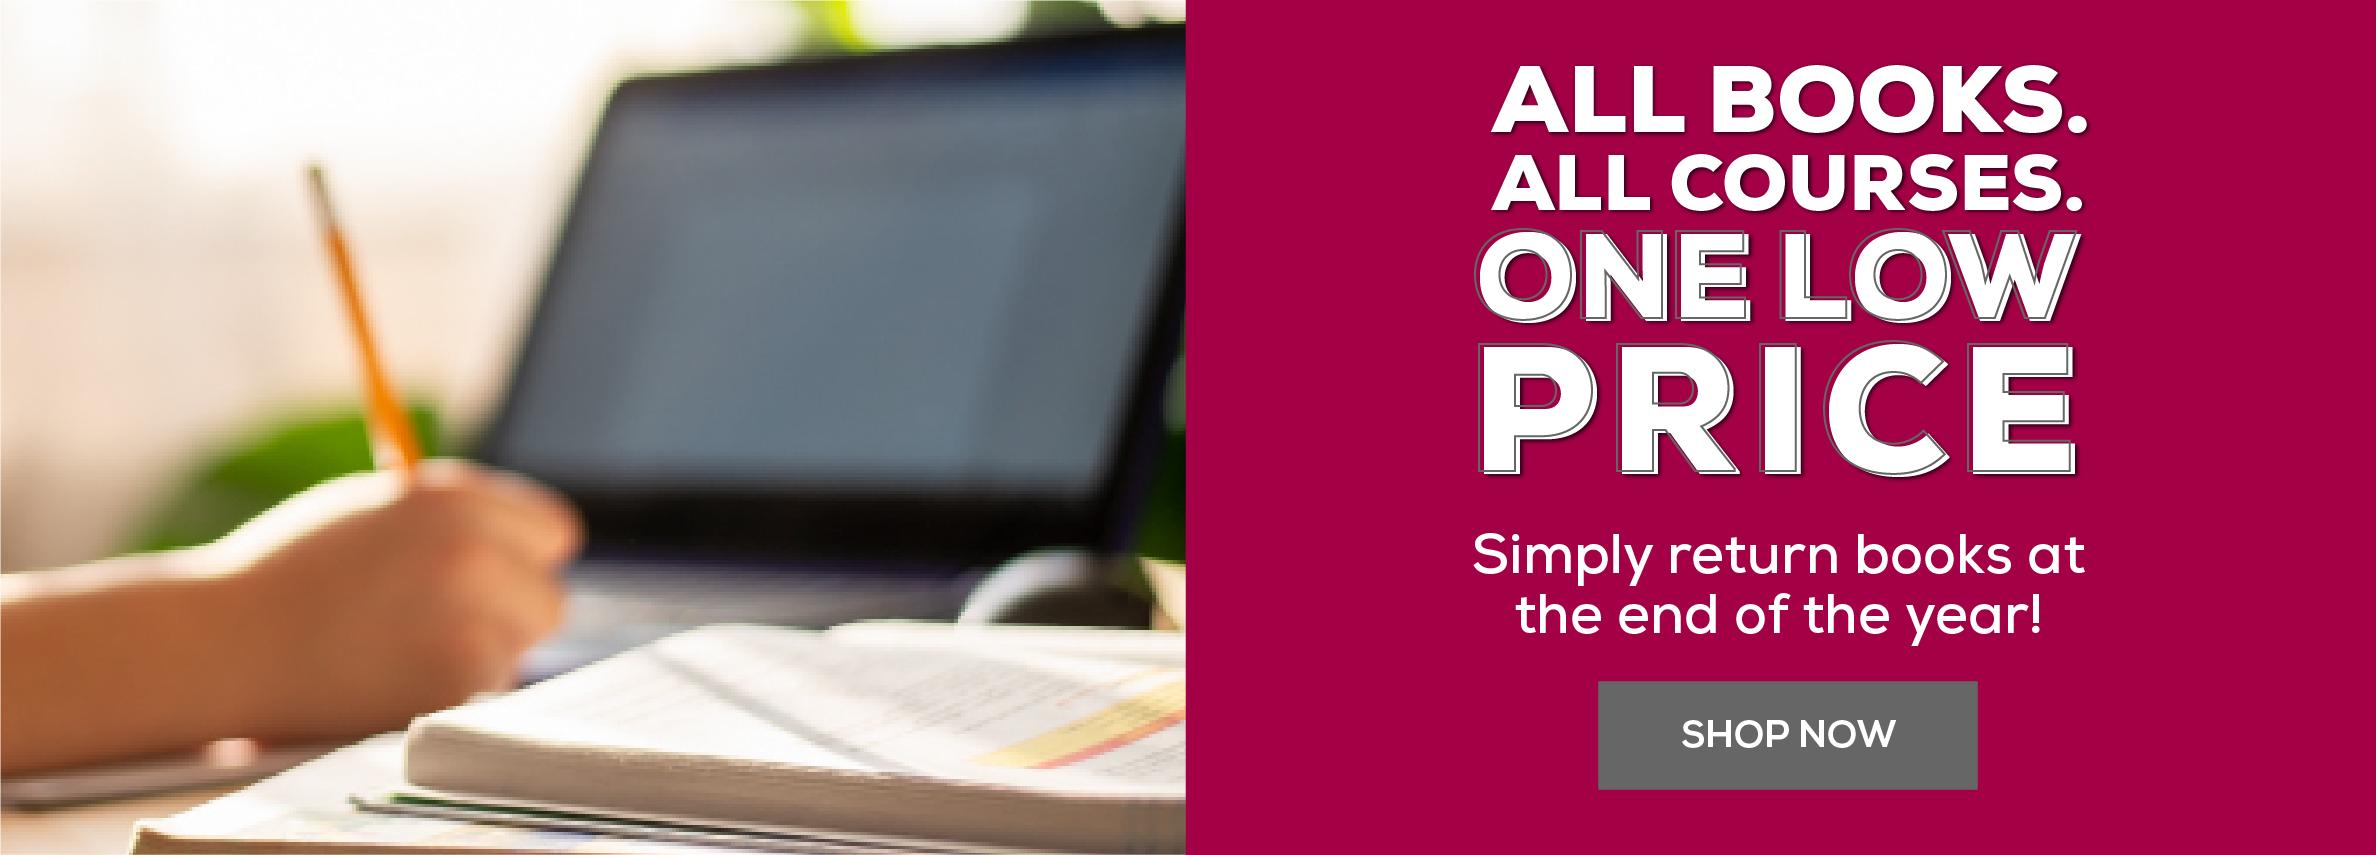 All books. all courses. one low price. simply return books at the end of the year! Shop now